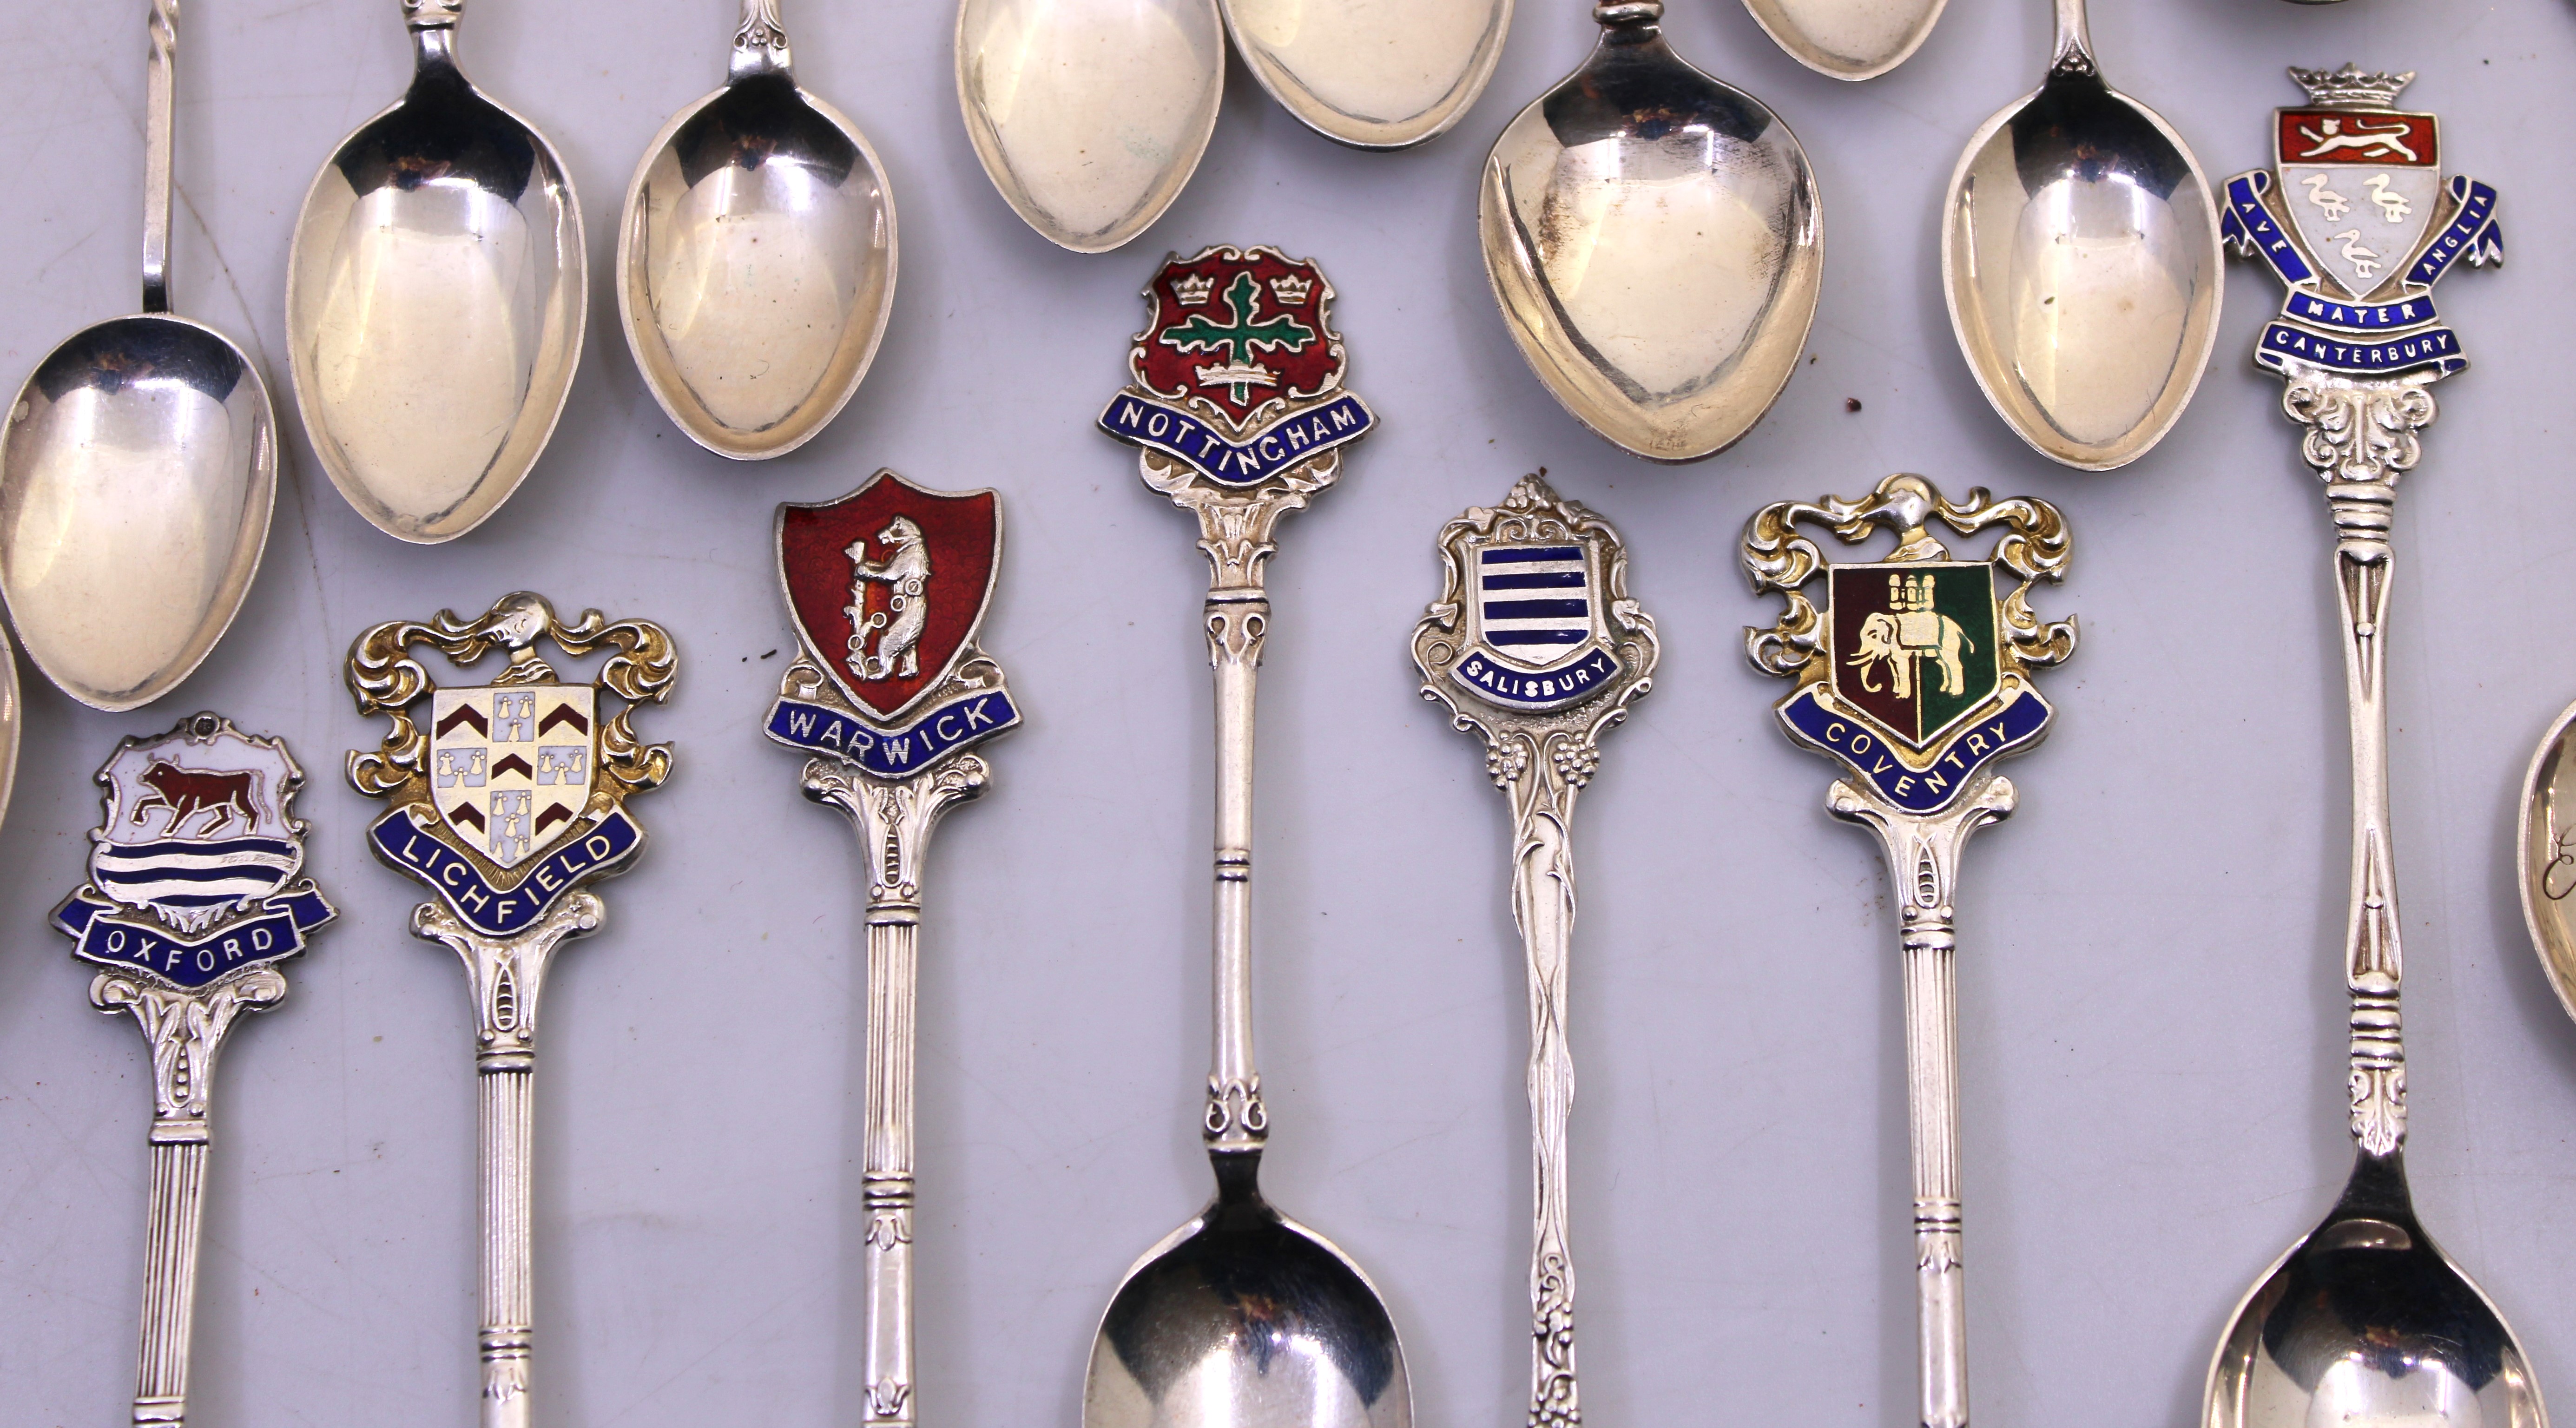 Selection of Sterling Silver Crested Teaspoons, EPNS Teaspoons, Commemorative Coins and a - Image 2 of 7